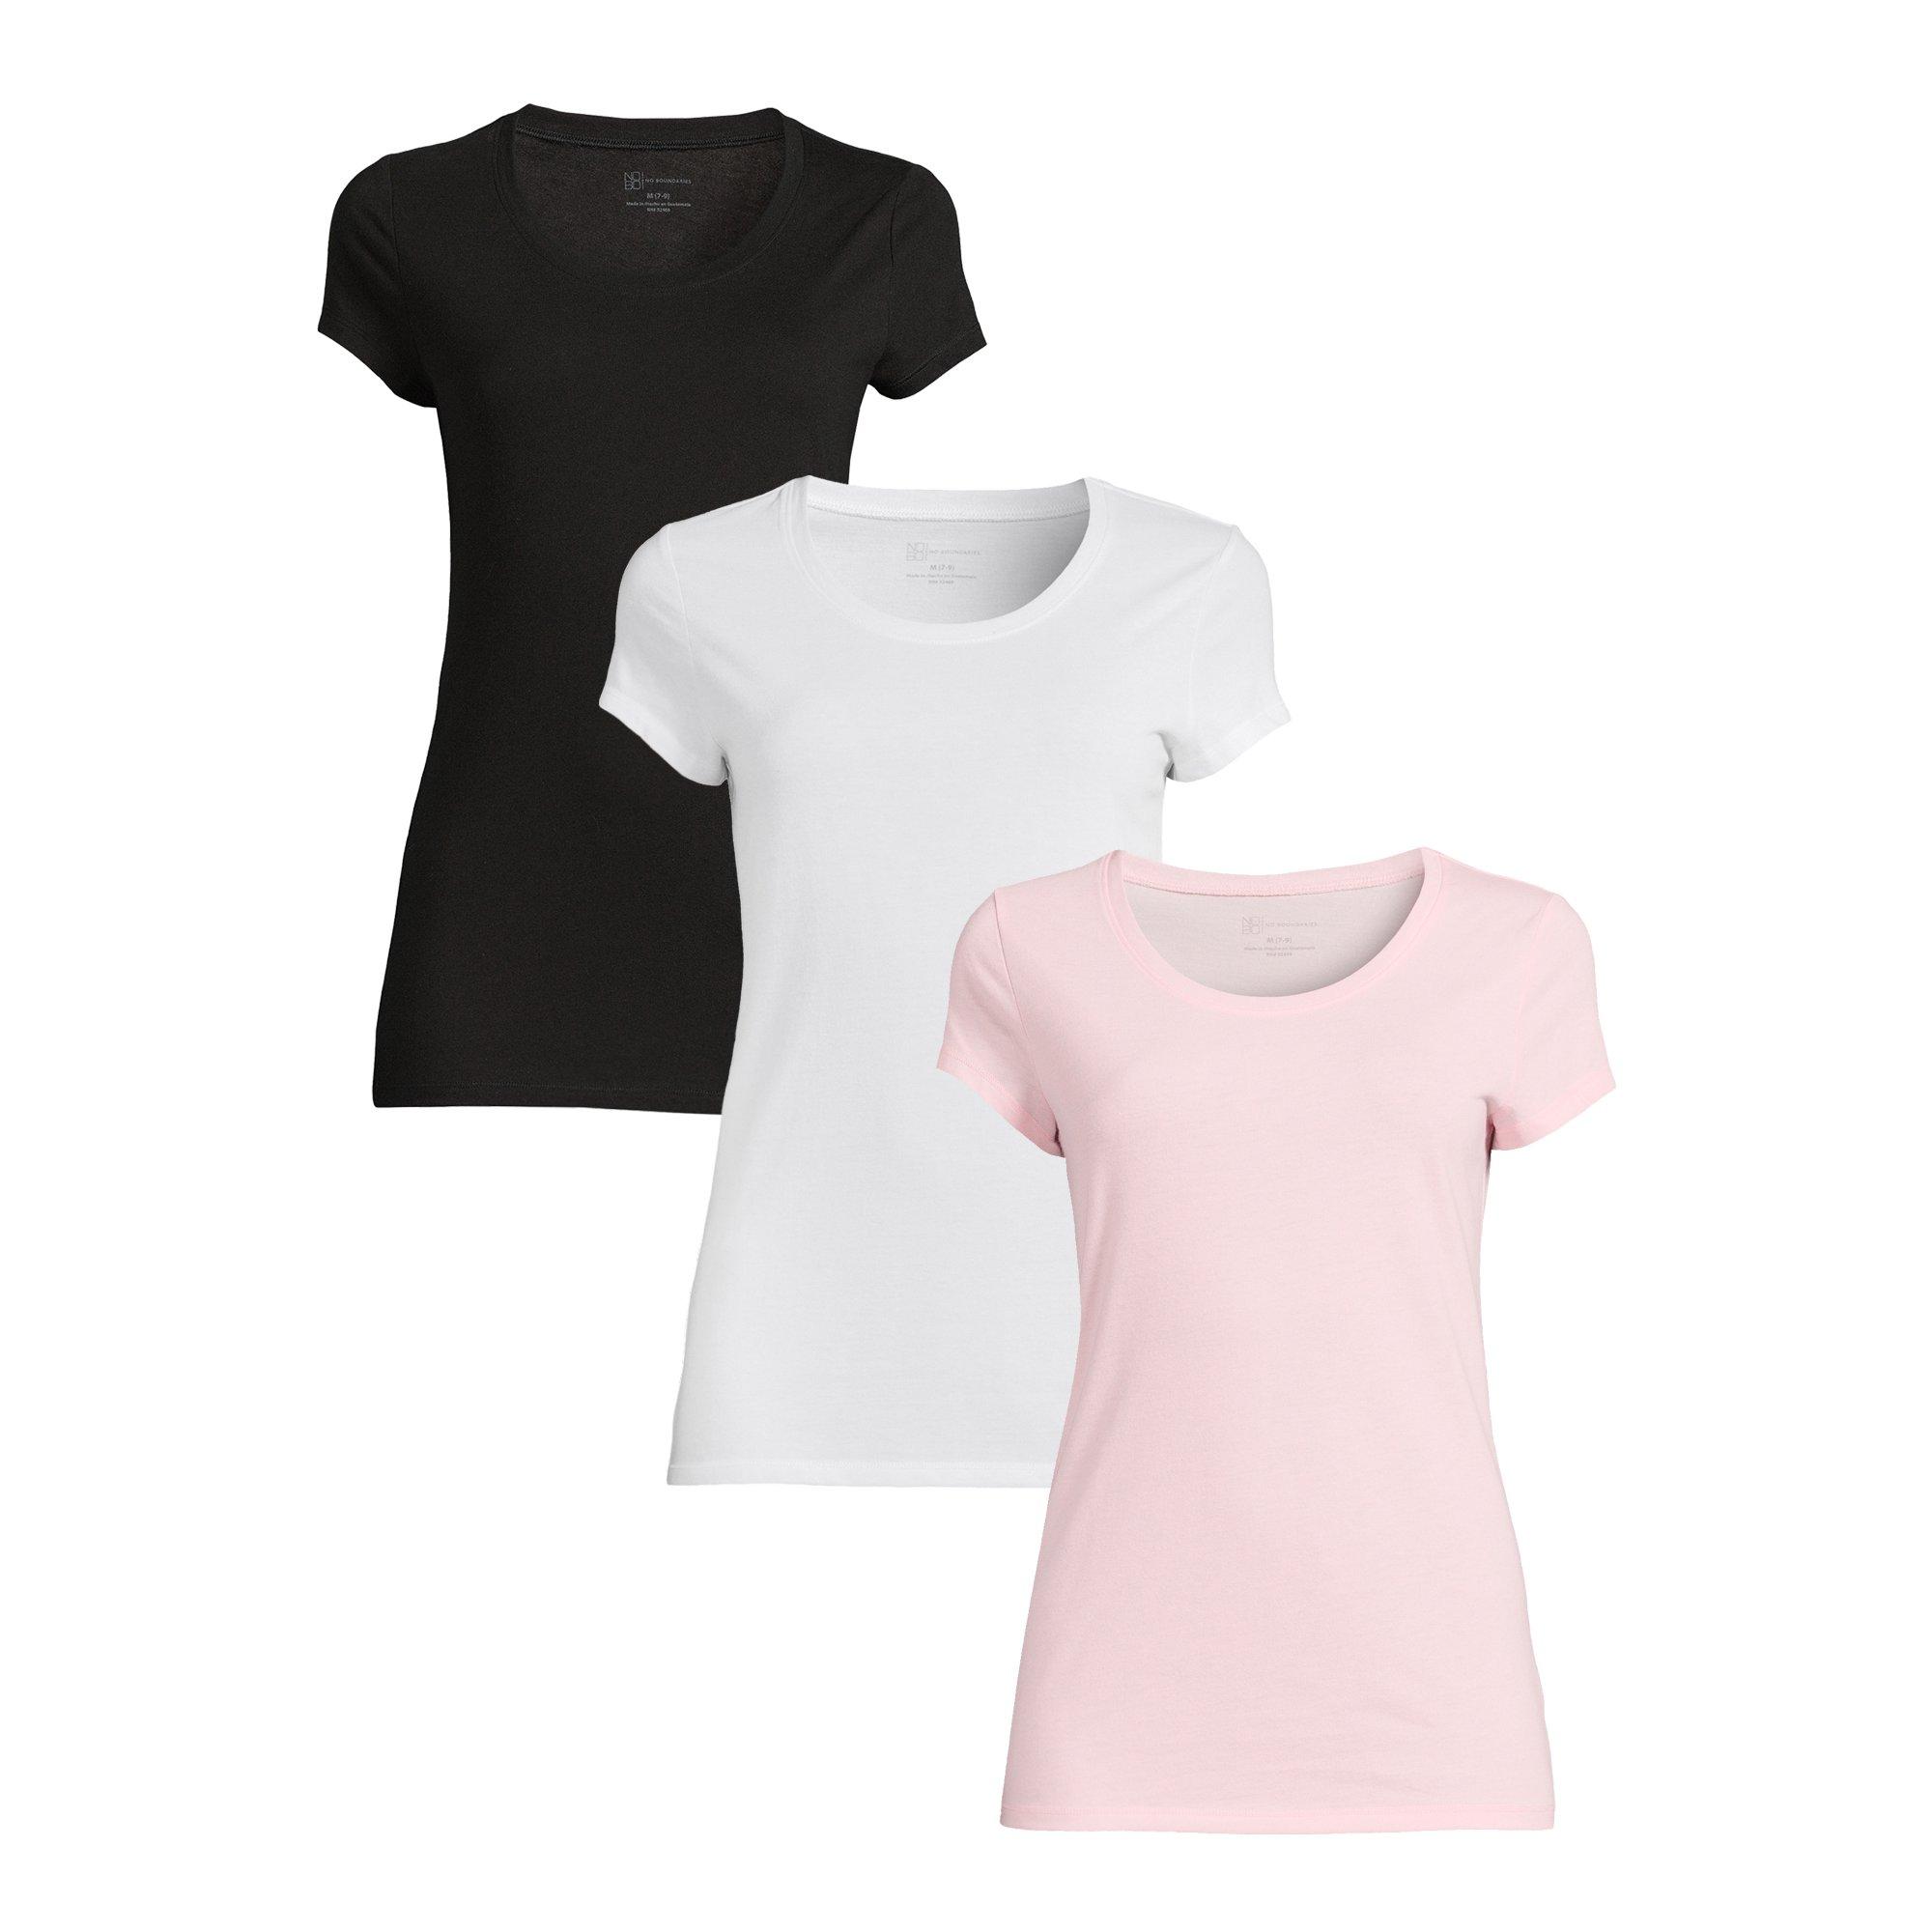 No Boundaries Juniors T-Shirt with Short Sleeves 3 Pack for $7.98